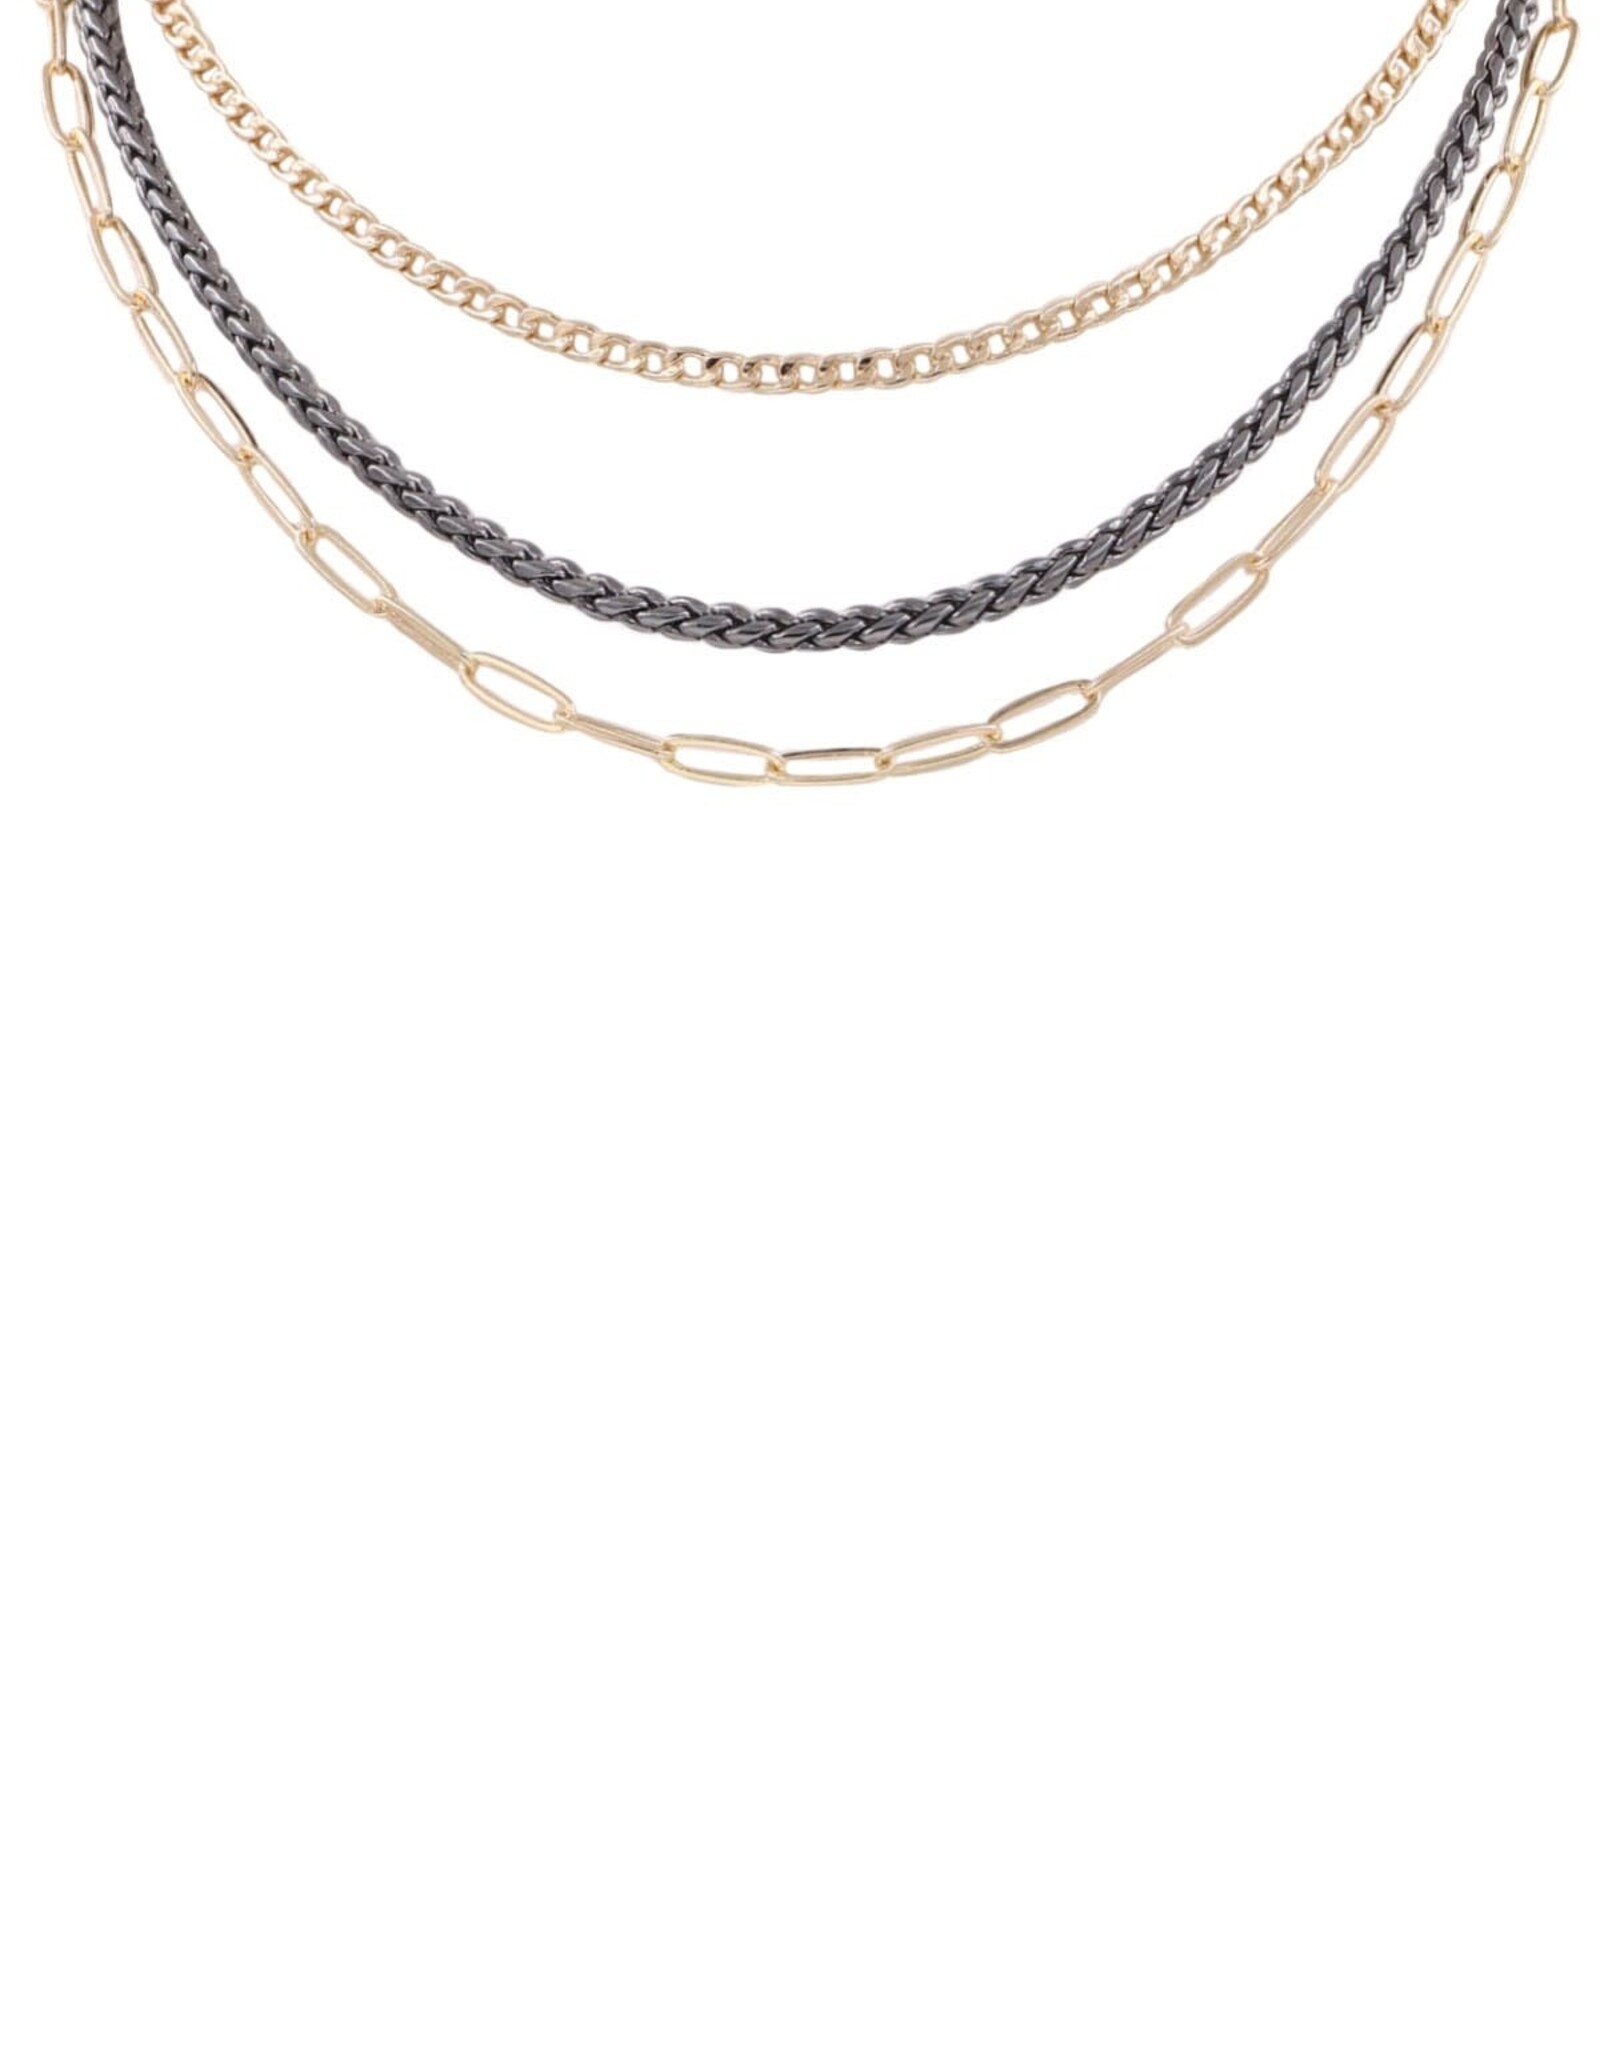 Two-Tone Gold/Gun Metal Layered Chain Necklace